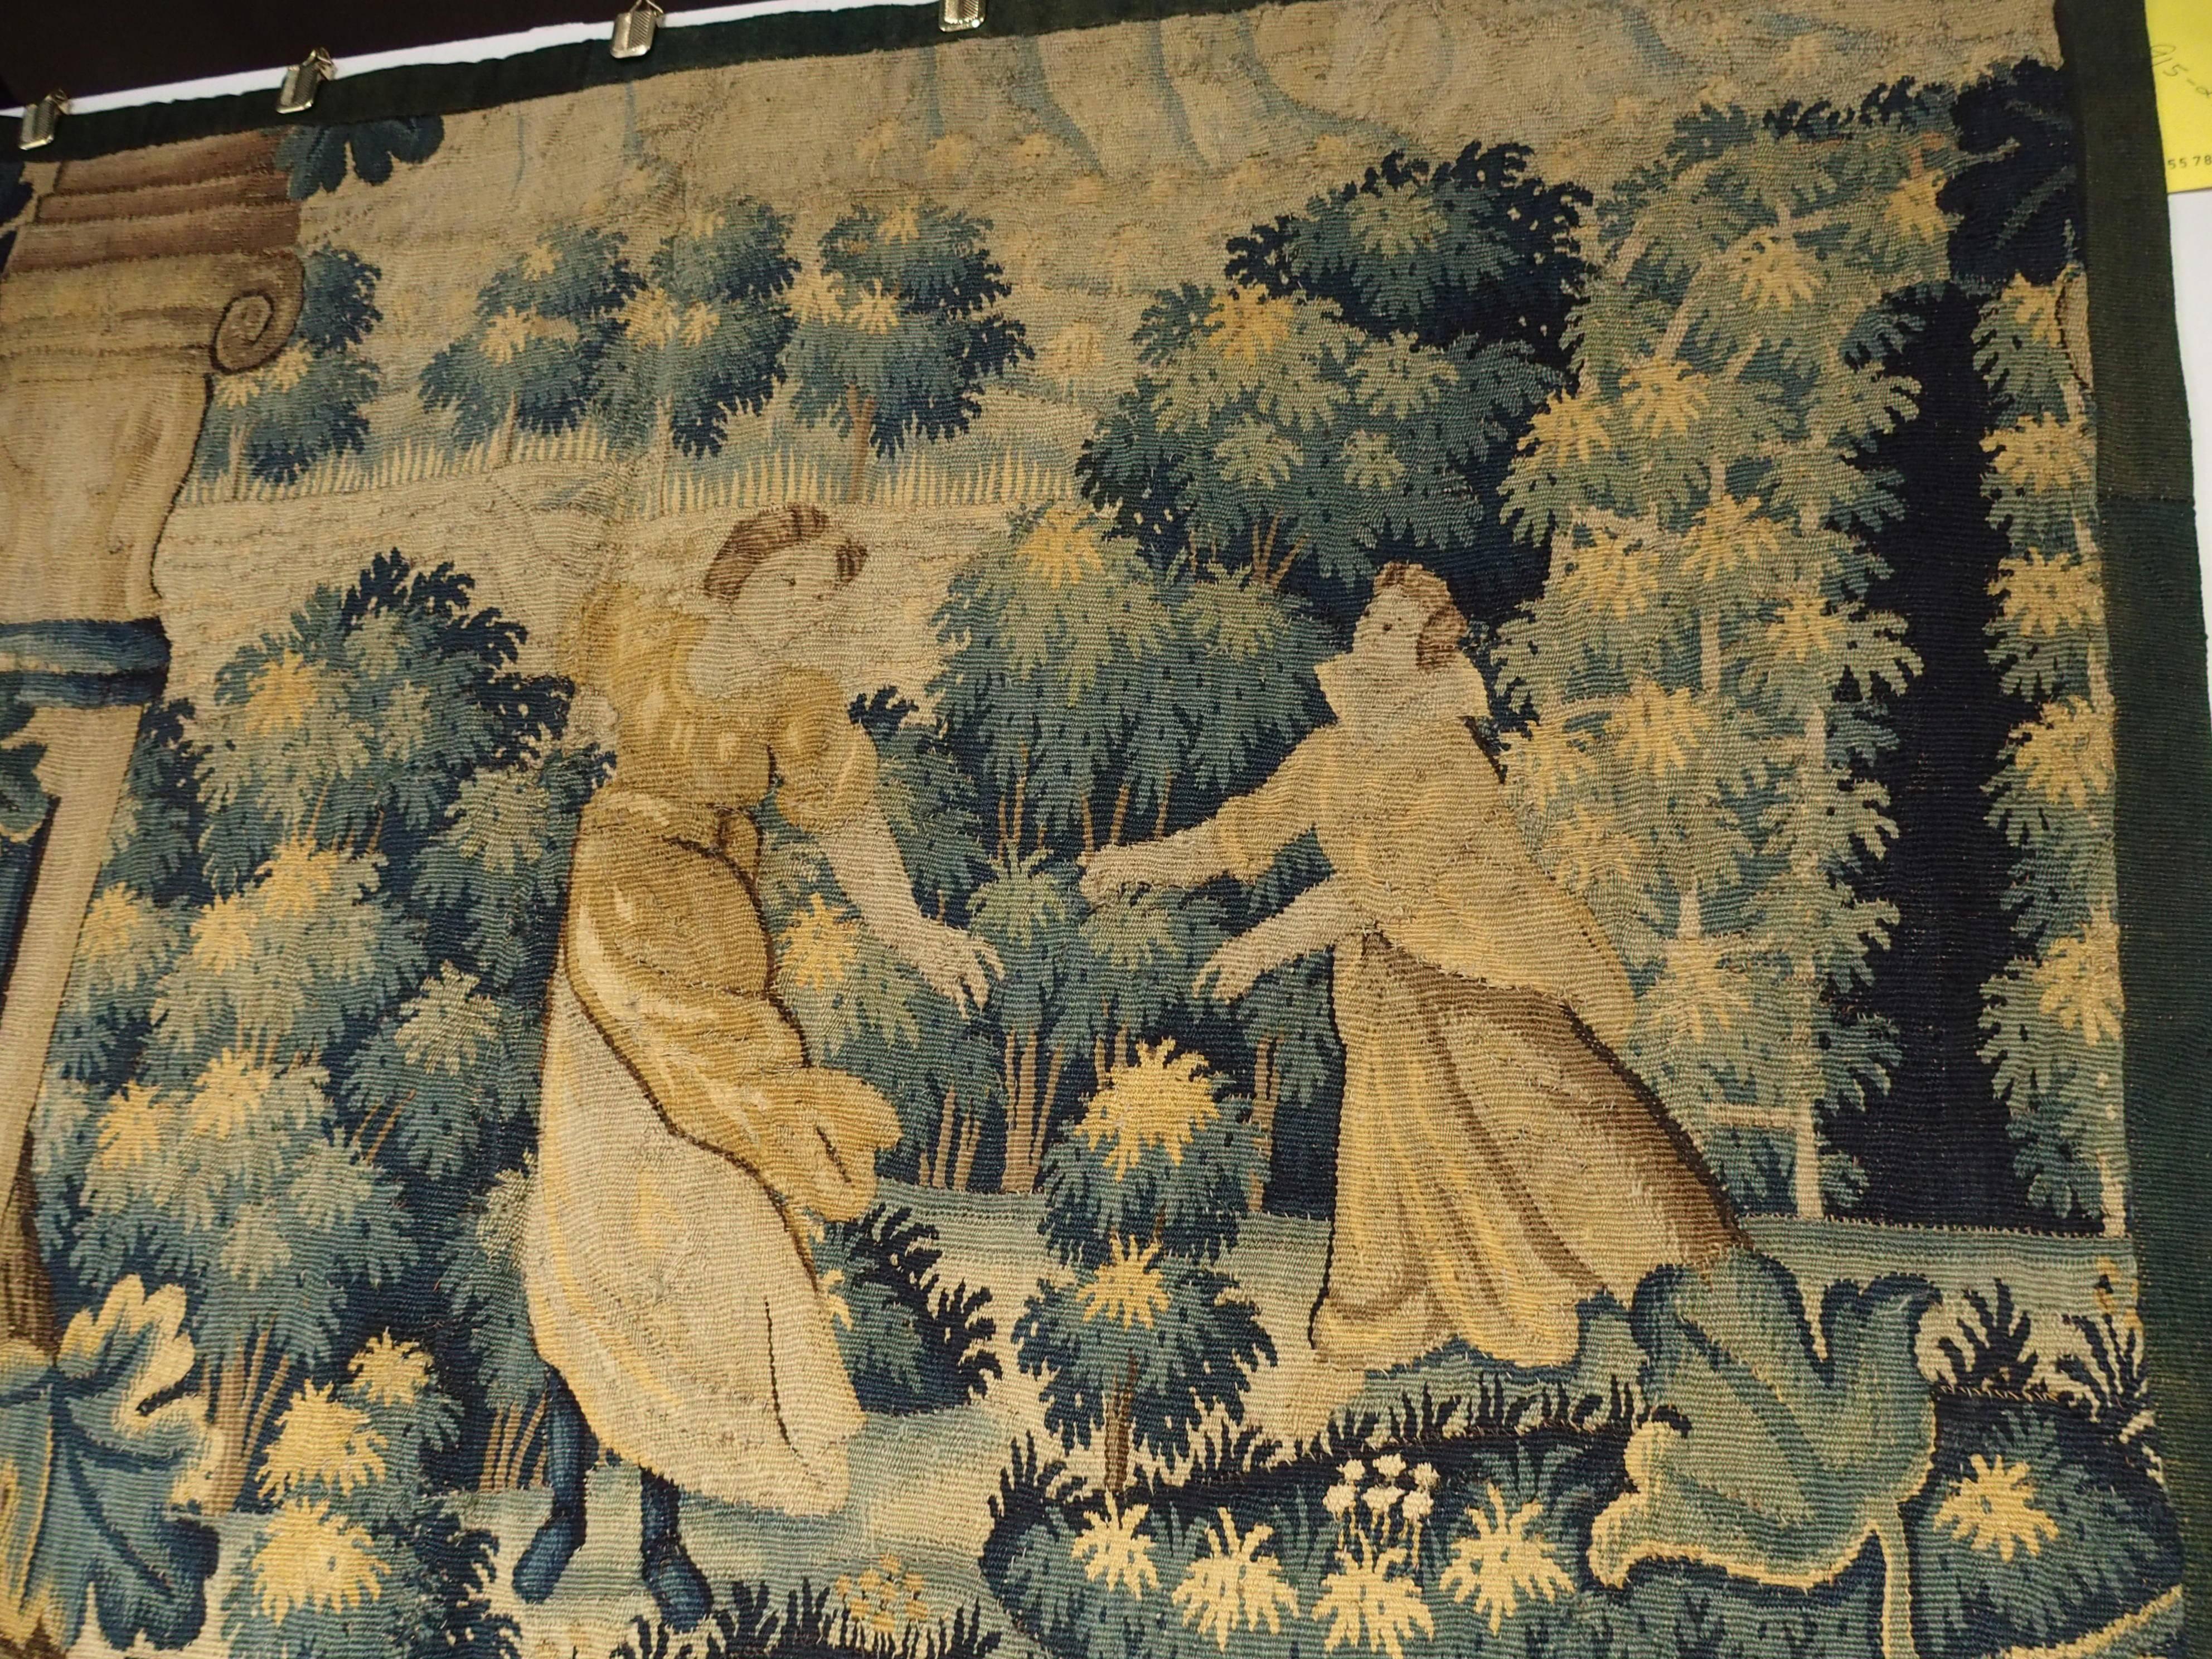 European 17th Century Tapestry Fragment from Flanders